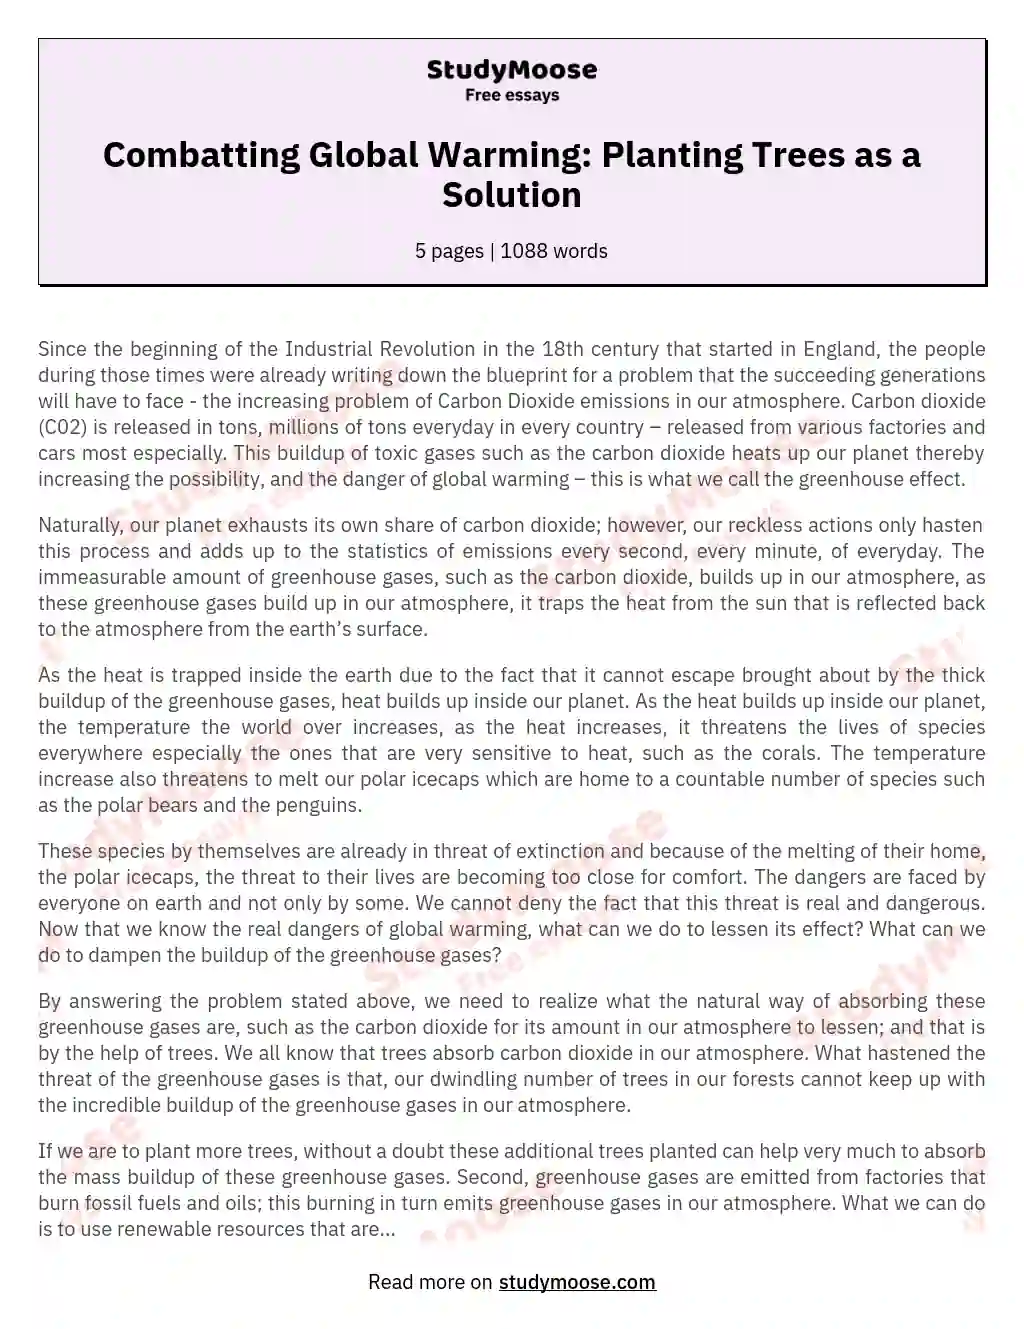 Combatting Global Warming: Planting Trees as a Solution essay